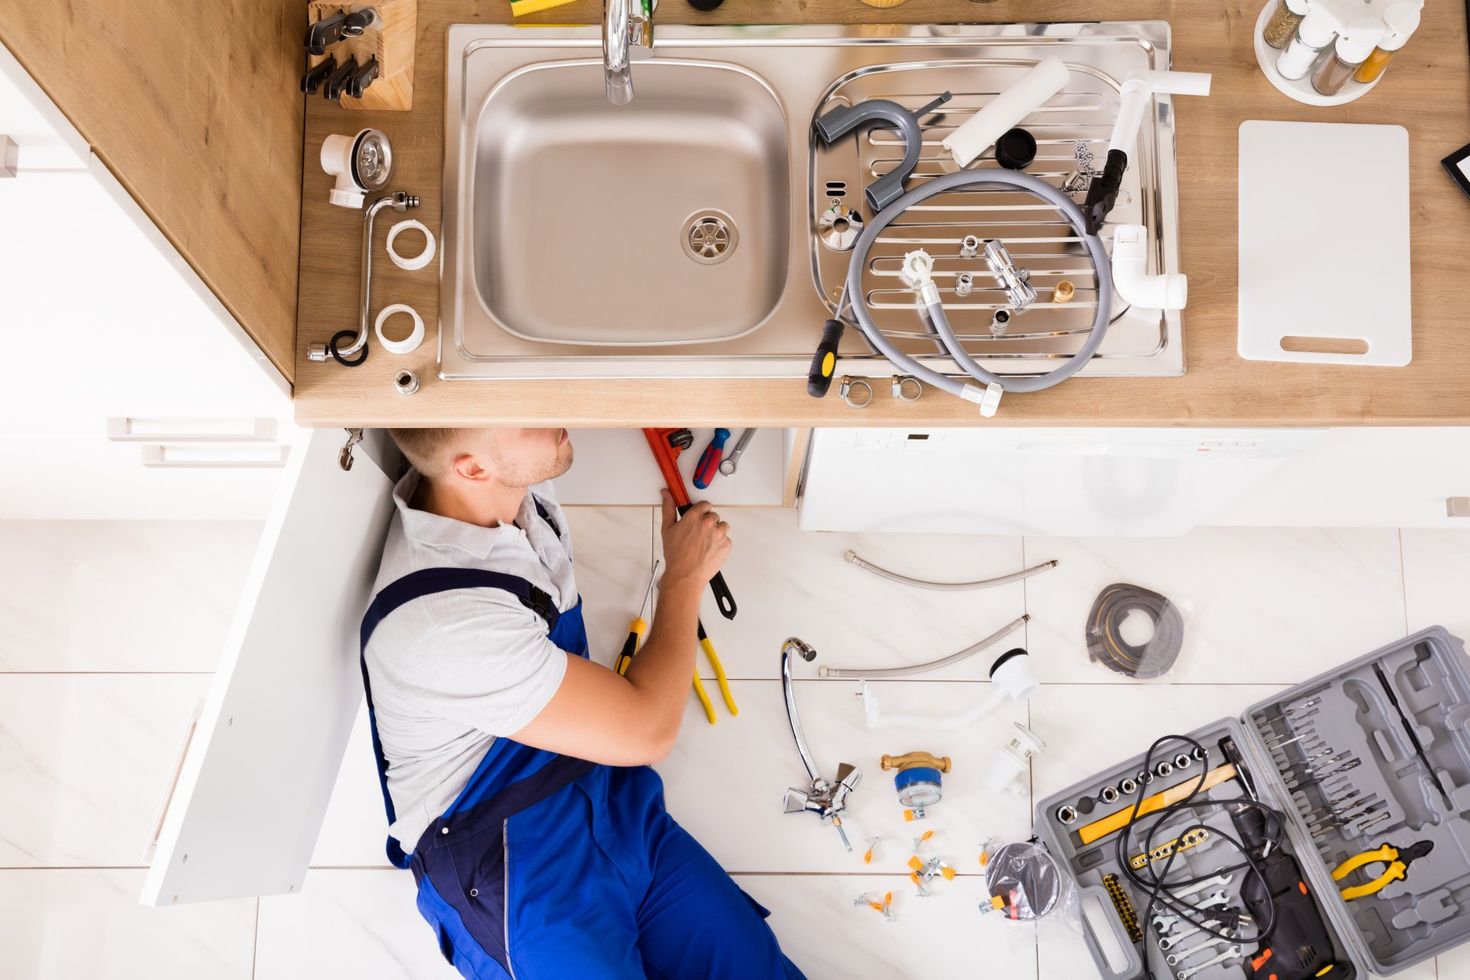 Professional Plumber — Wet & Dry Plumbing & Gas in Toowoomba, QLD